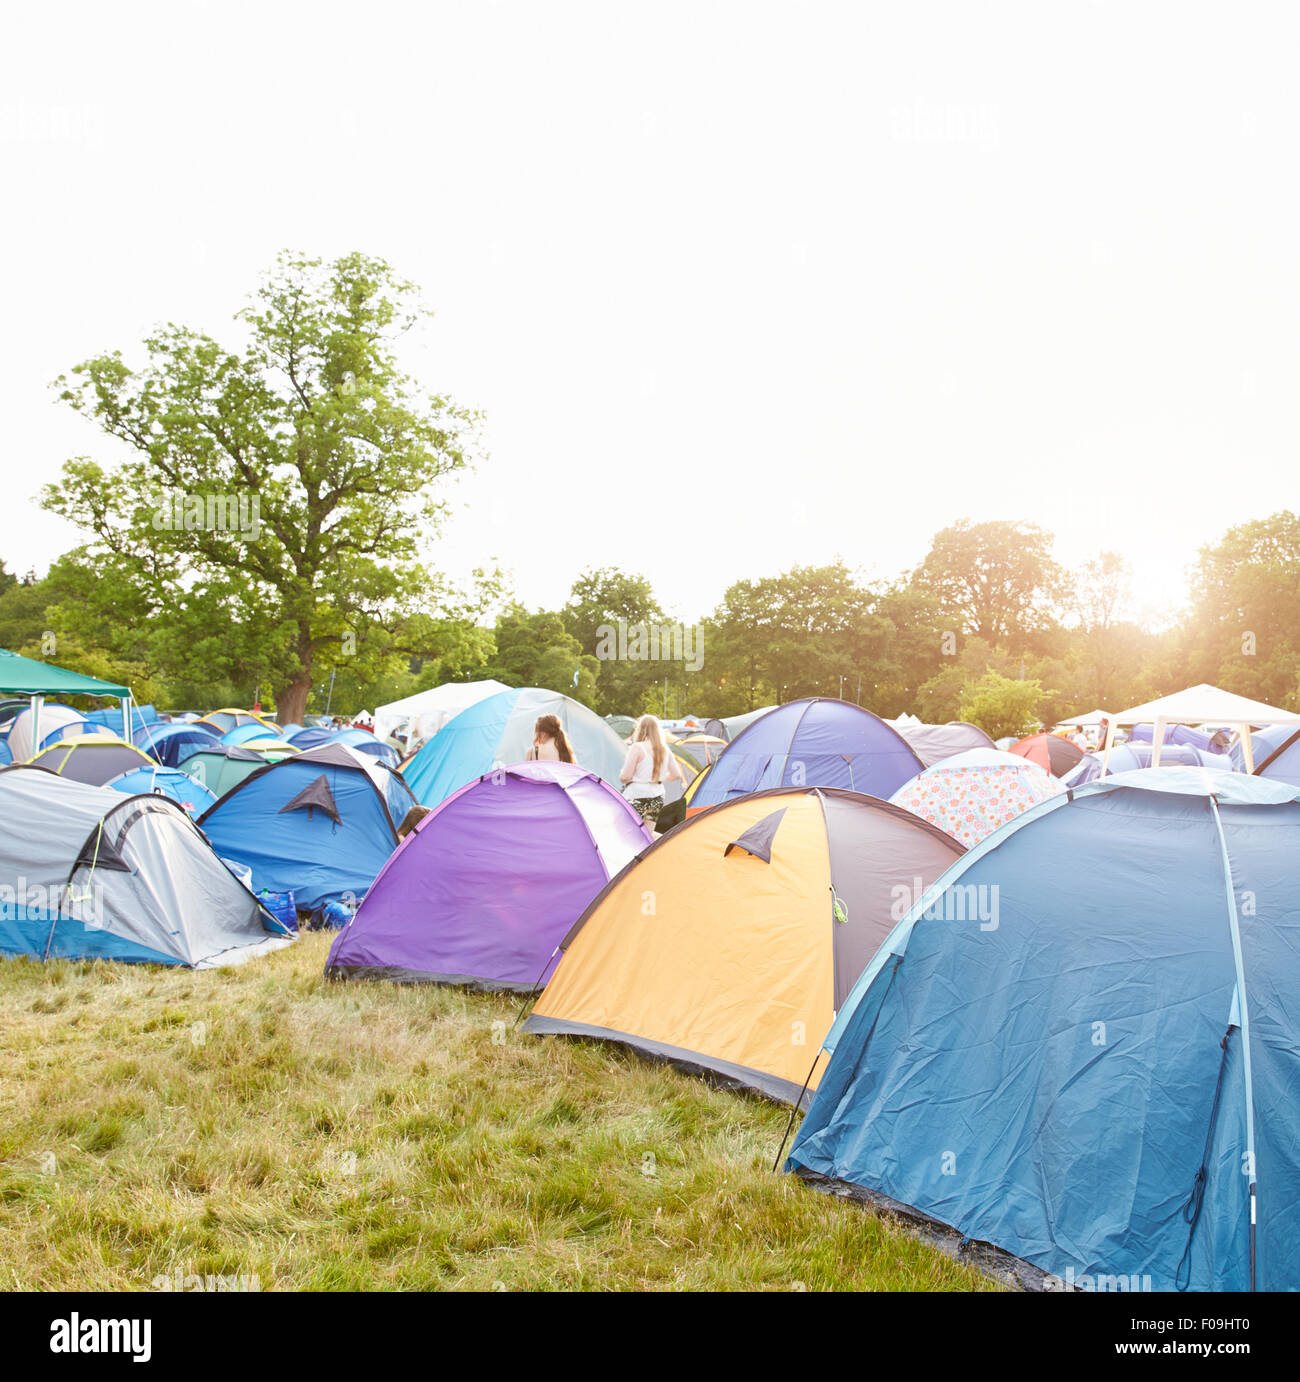 Tents on a music festival campsite Stock Photo